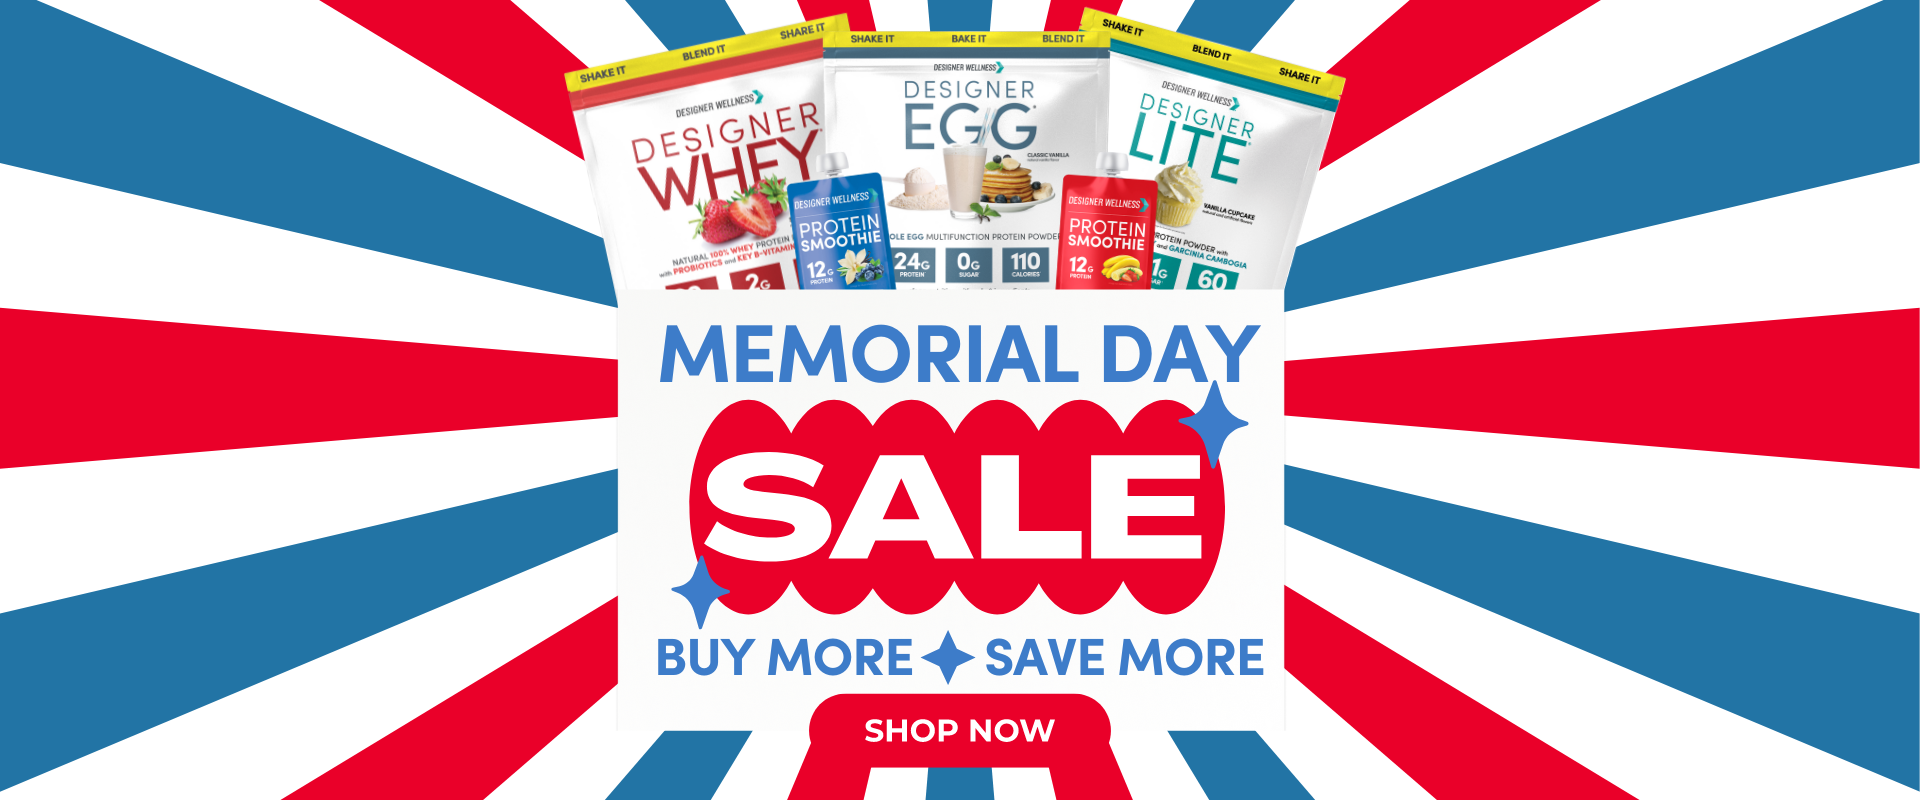 DW_Promotion_Graphics_Website_Banner_-_Memorial_Day_Sale